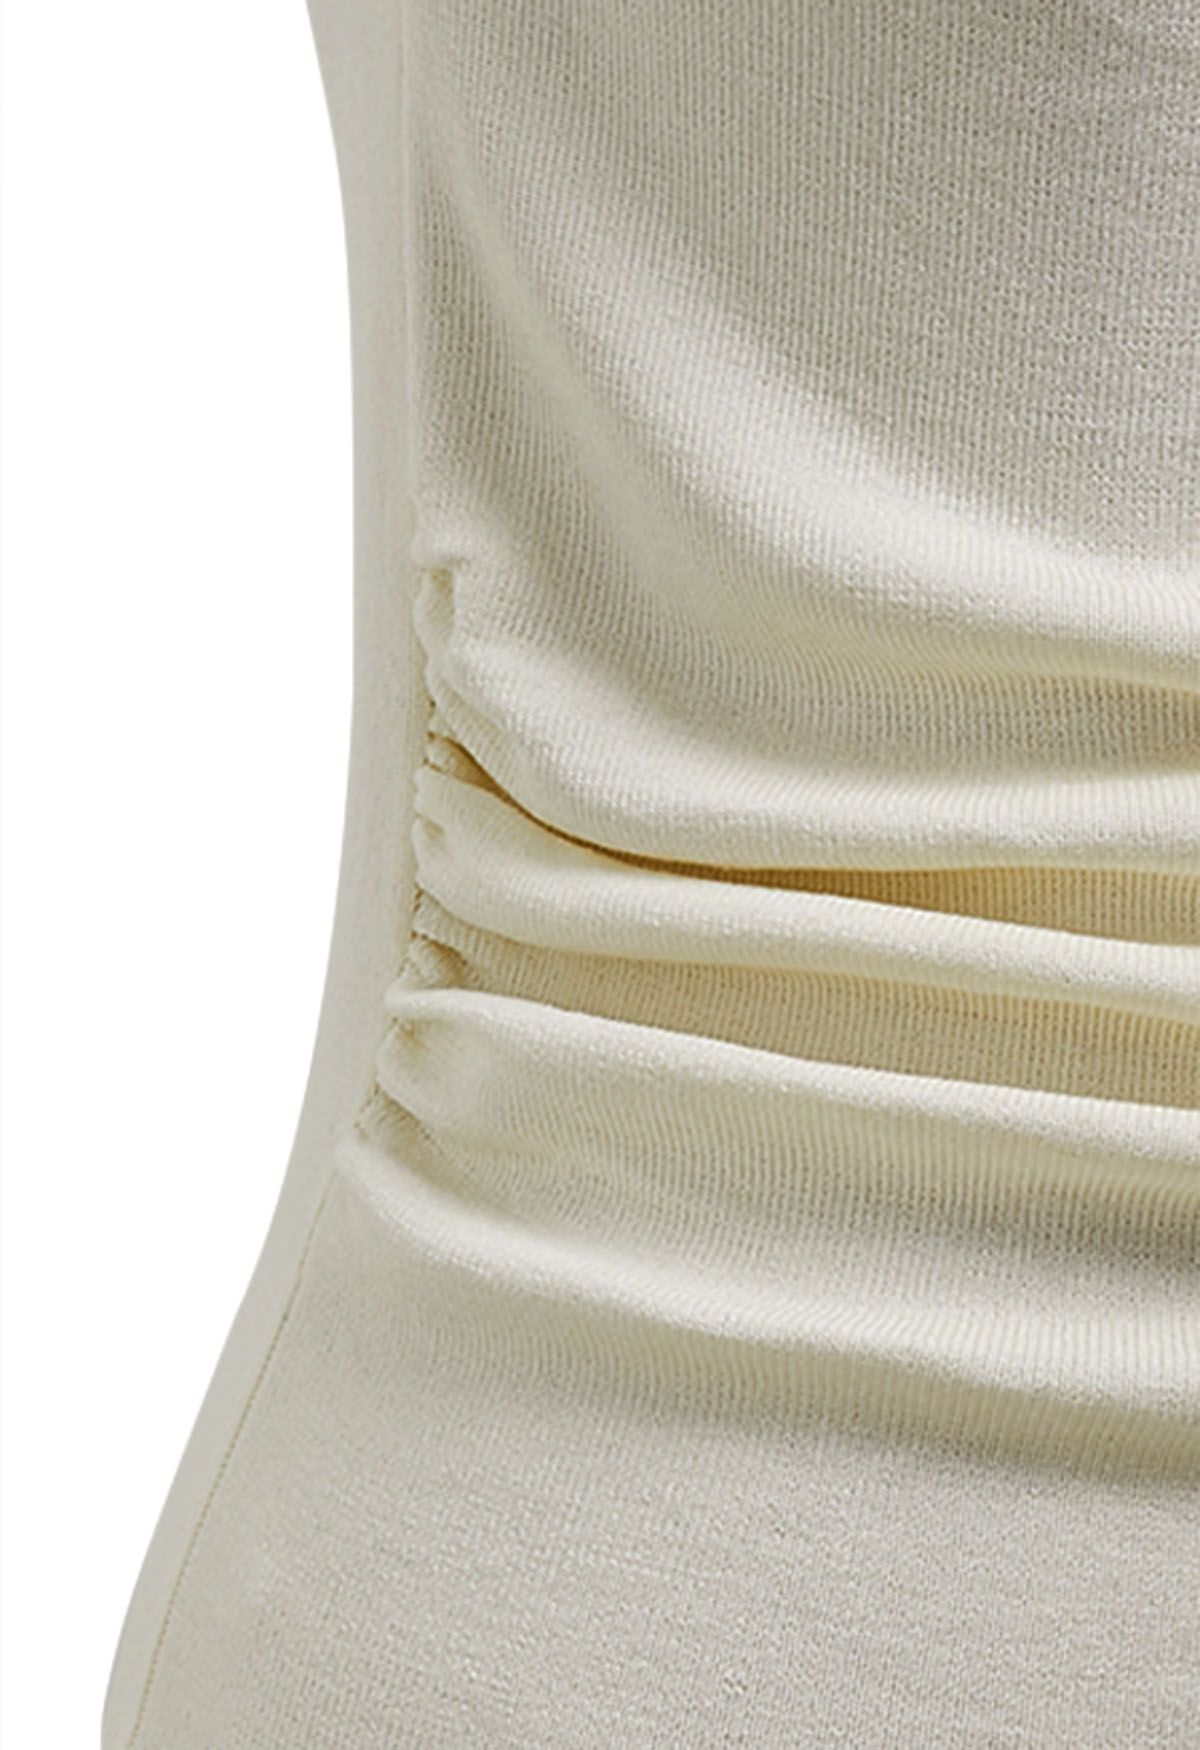 Side Knot Ruched Sleeveless Knit Top in Cream